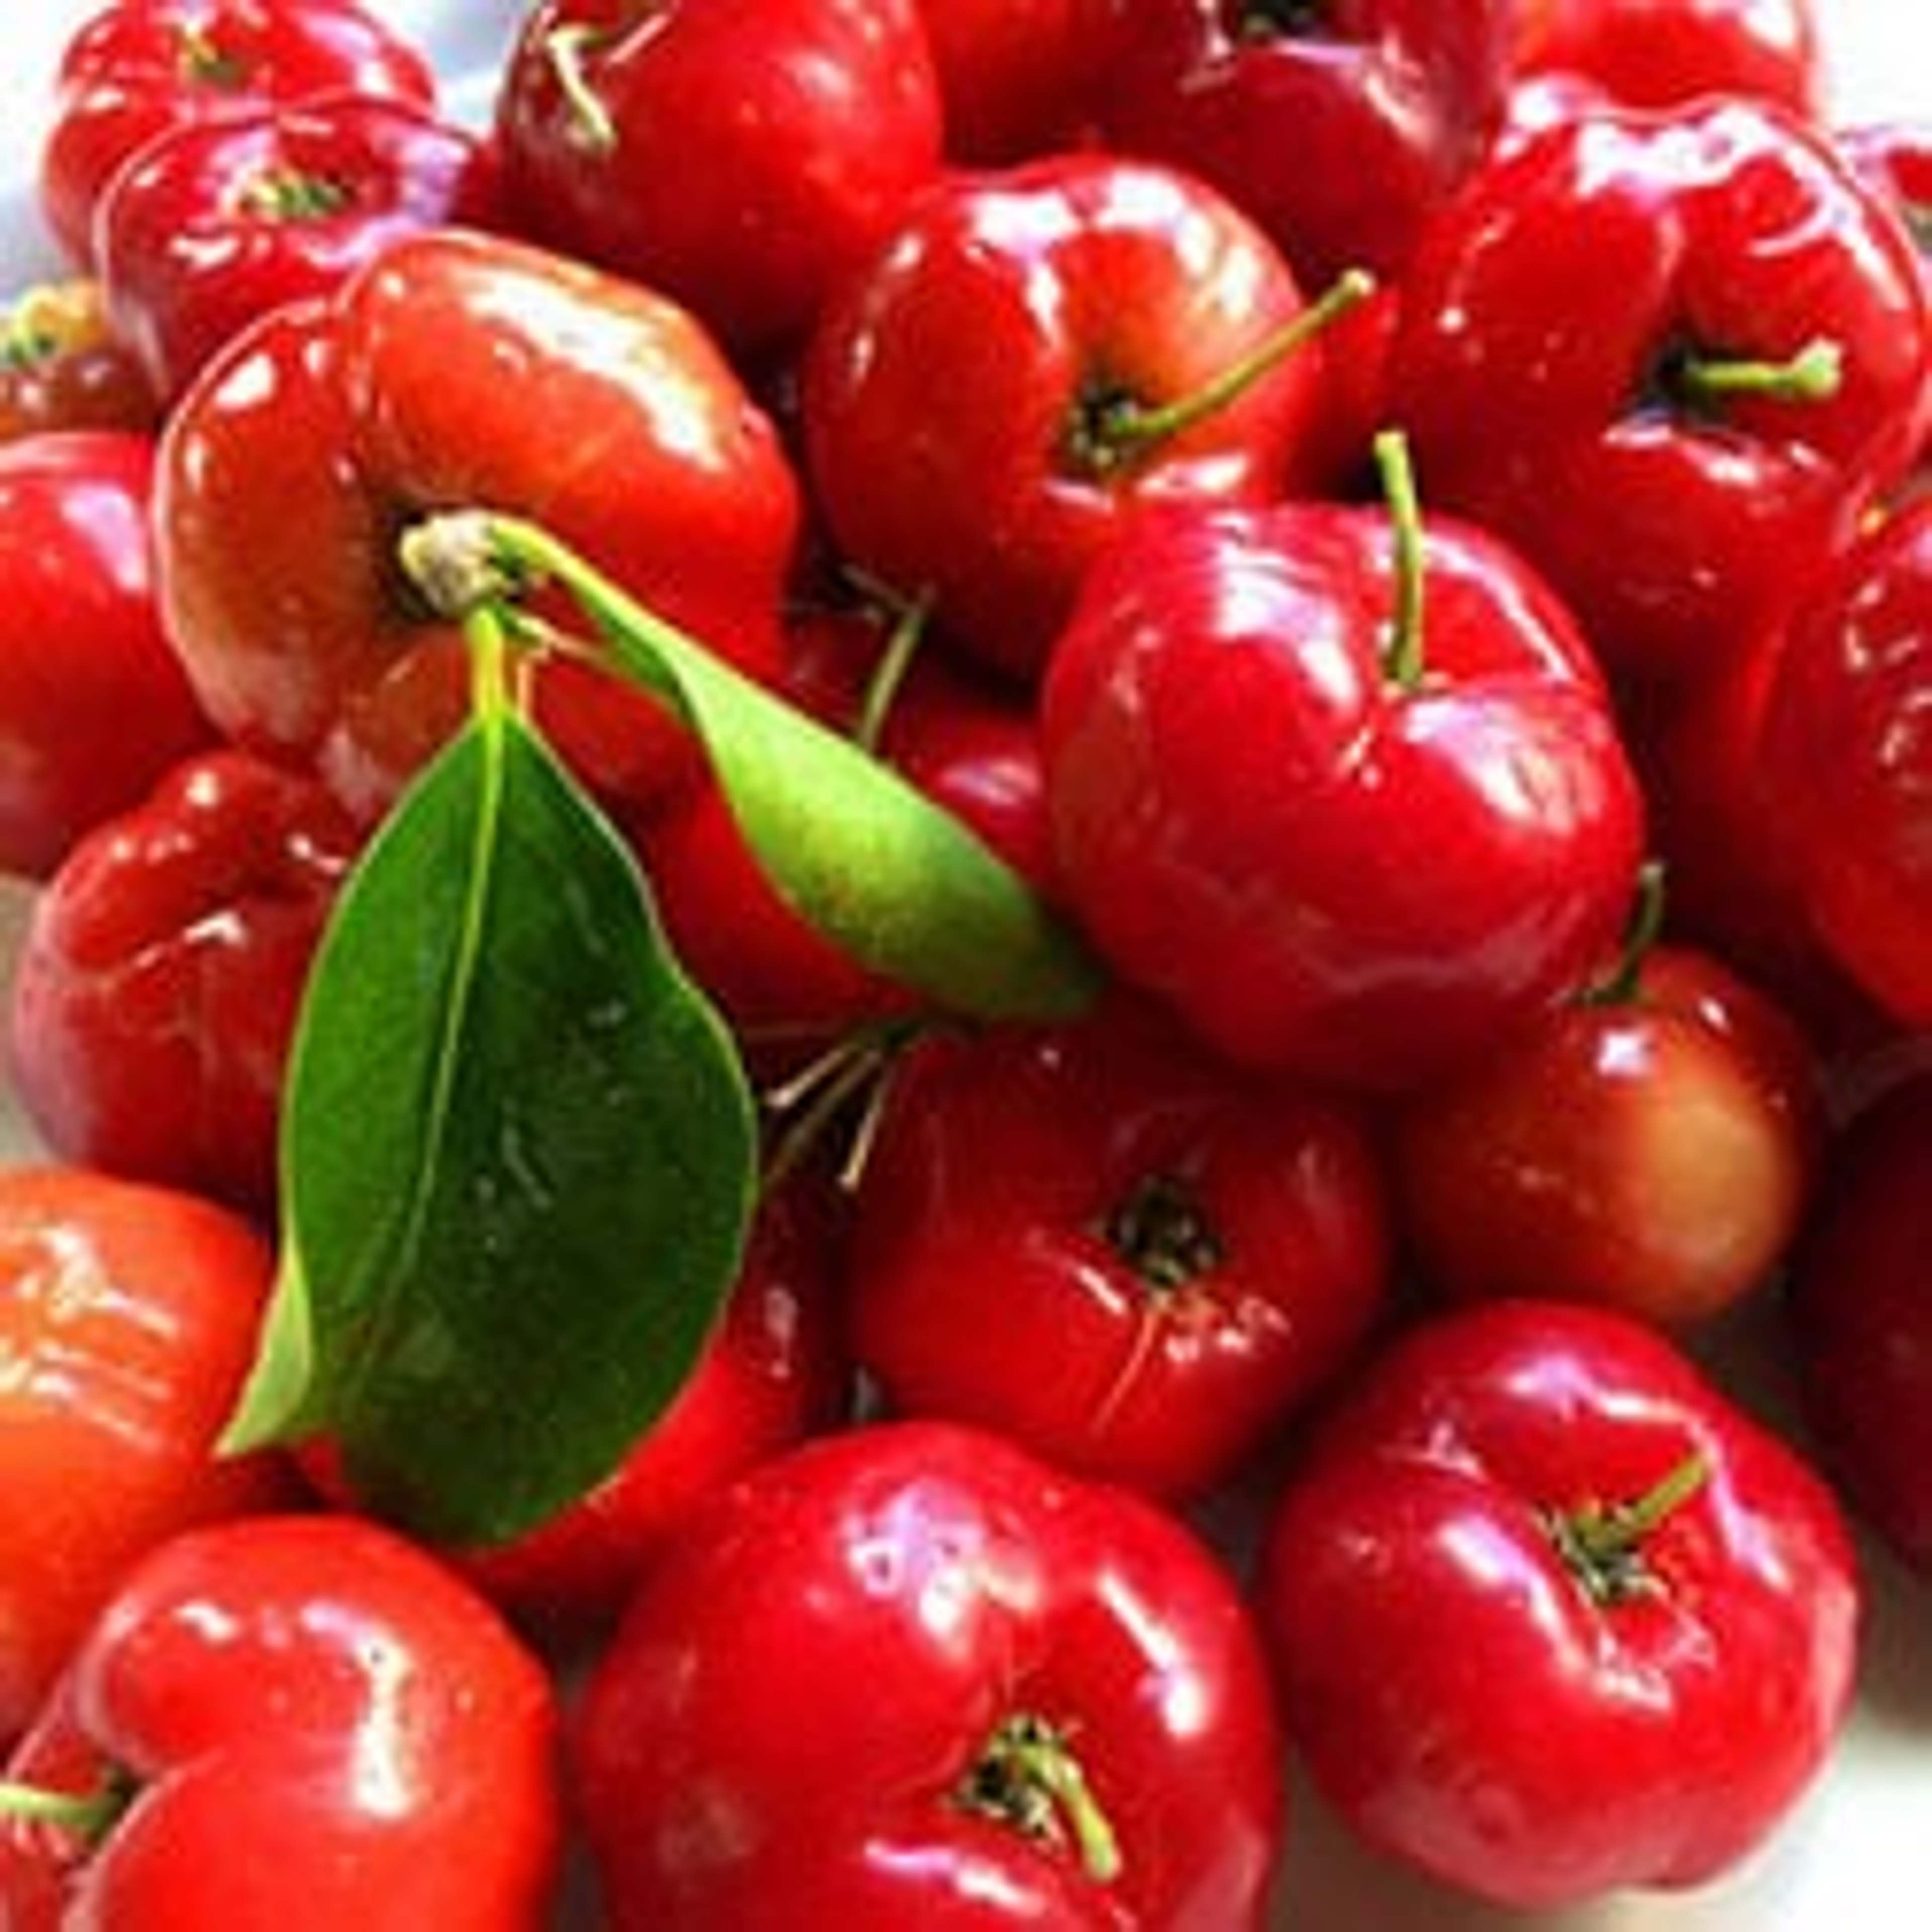 Acerola - A natural vitamin C for your health